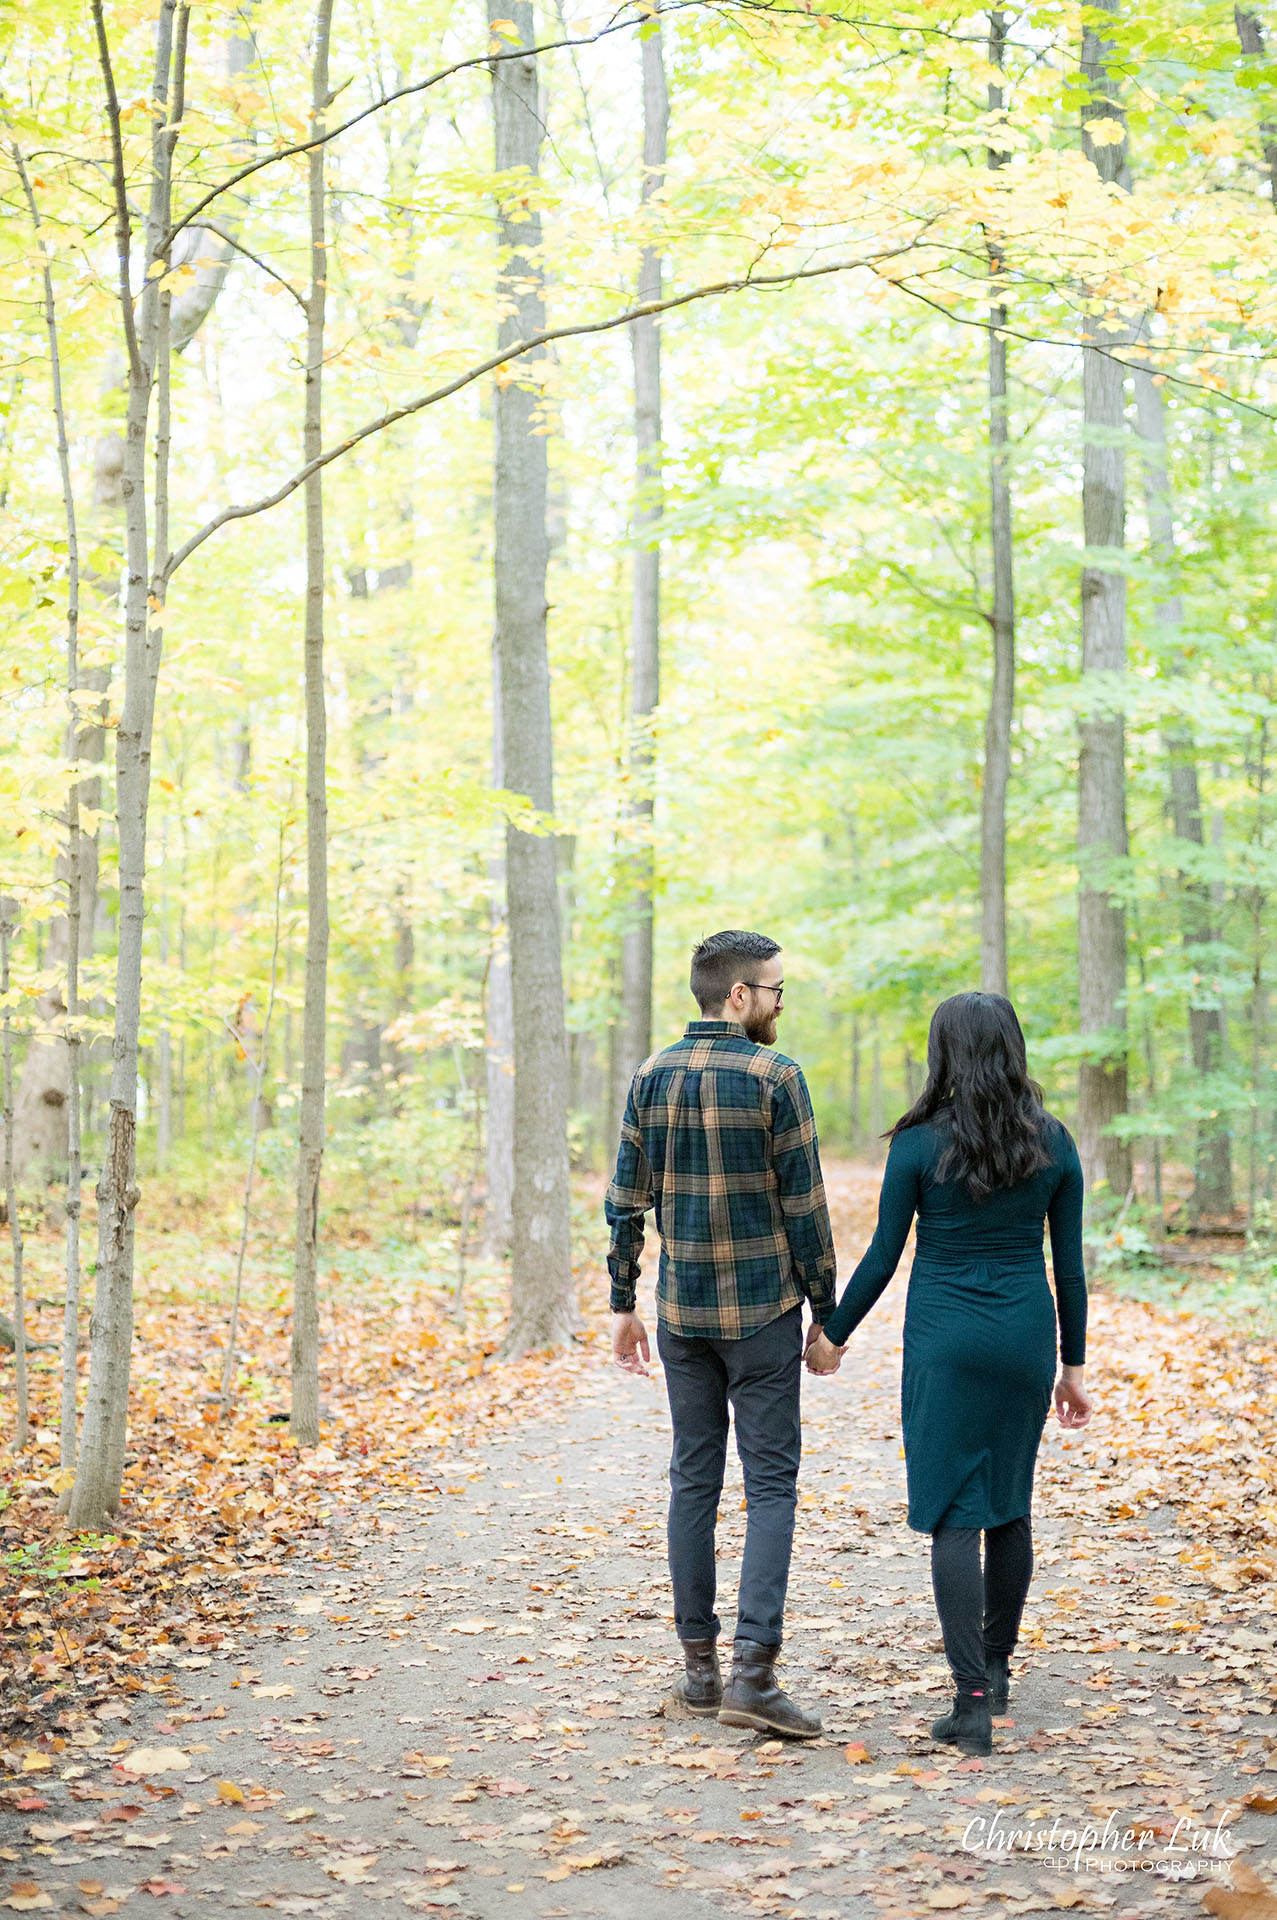 Markham Pregnancy Photos Pictures Toronto Maternity Photographer Mother Father Motherhood Fatherhood Baby Bump Candid Natural Photojournalistic Wooden Holding Hands Walking Together Forest Trail Fall Autumn Leaves Portrait